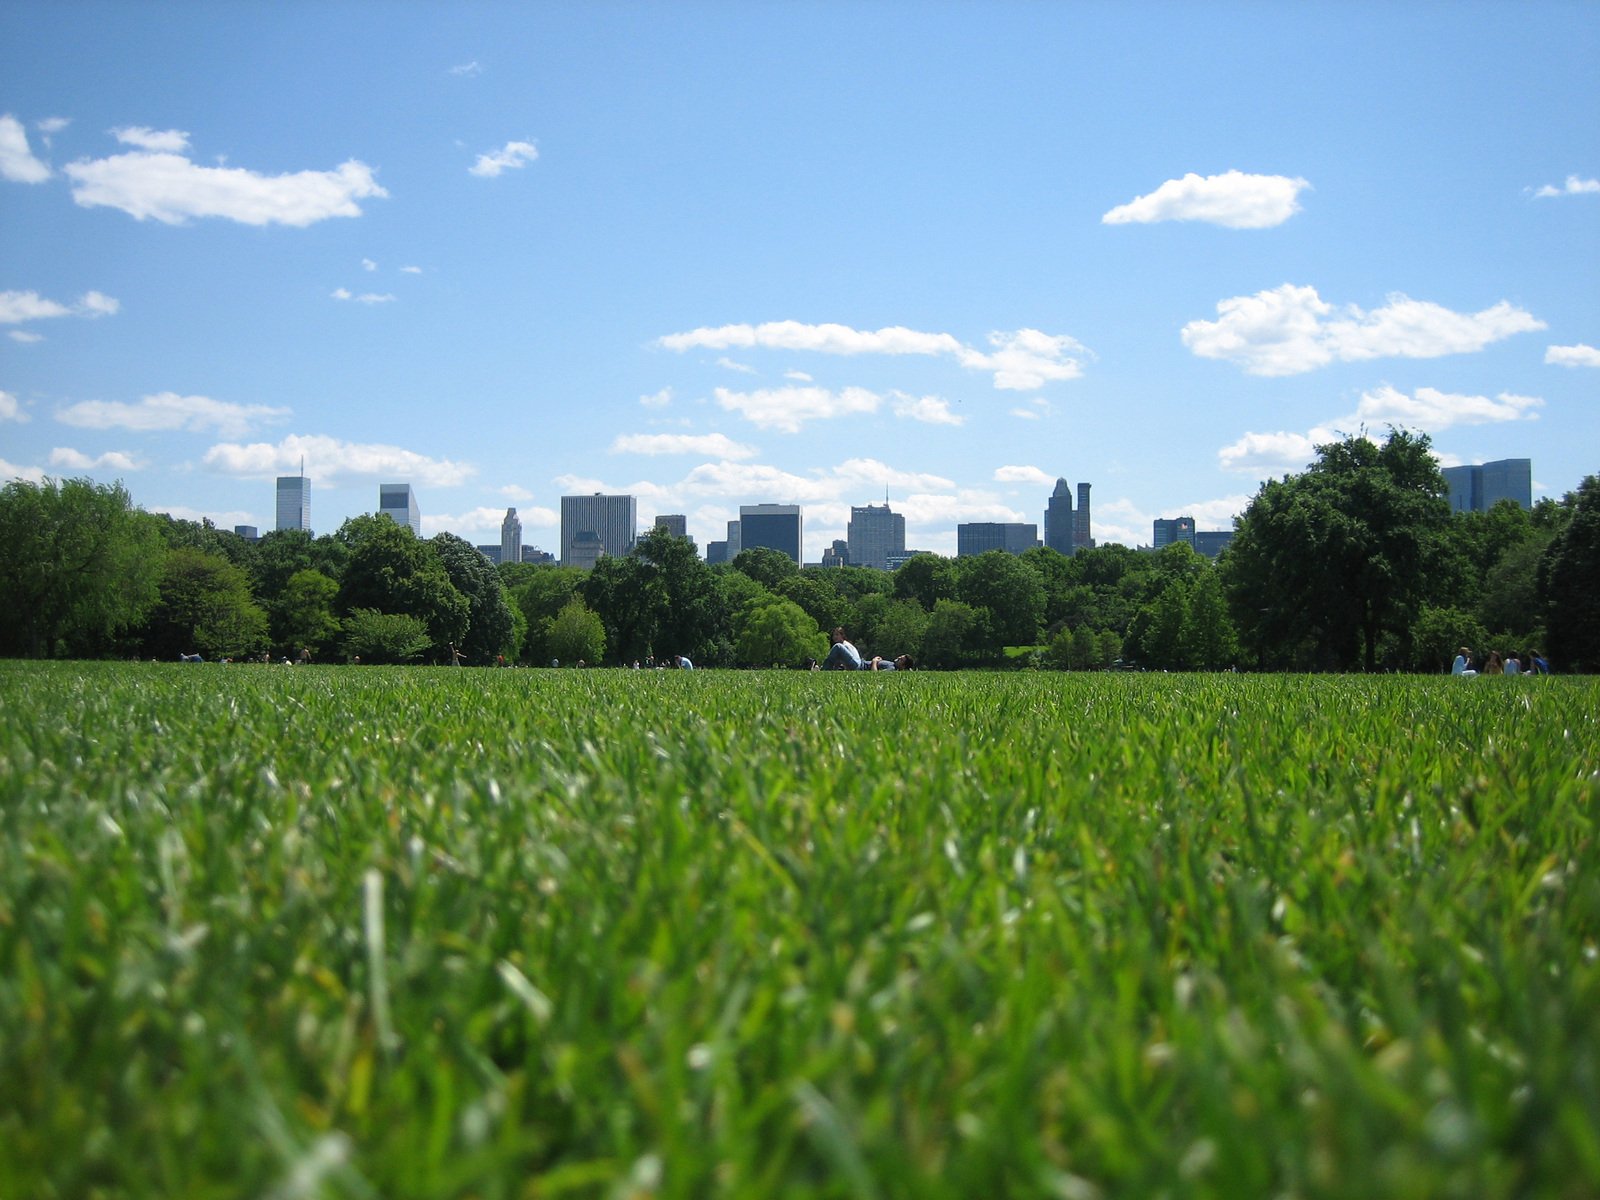 the grass is green in the city and blue skies